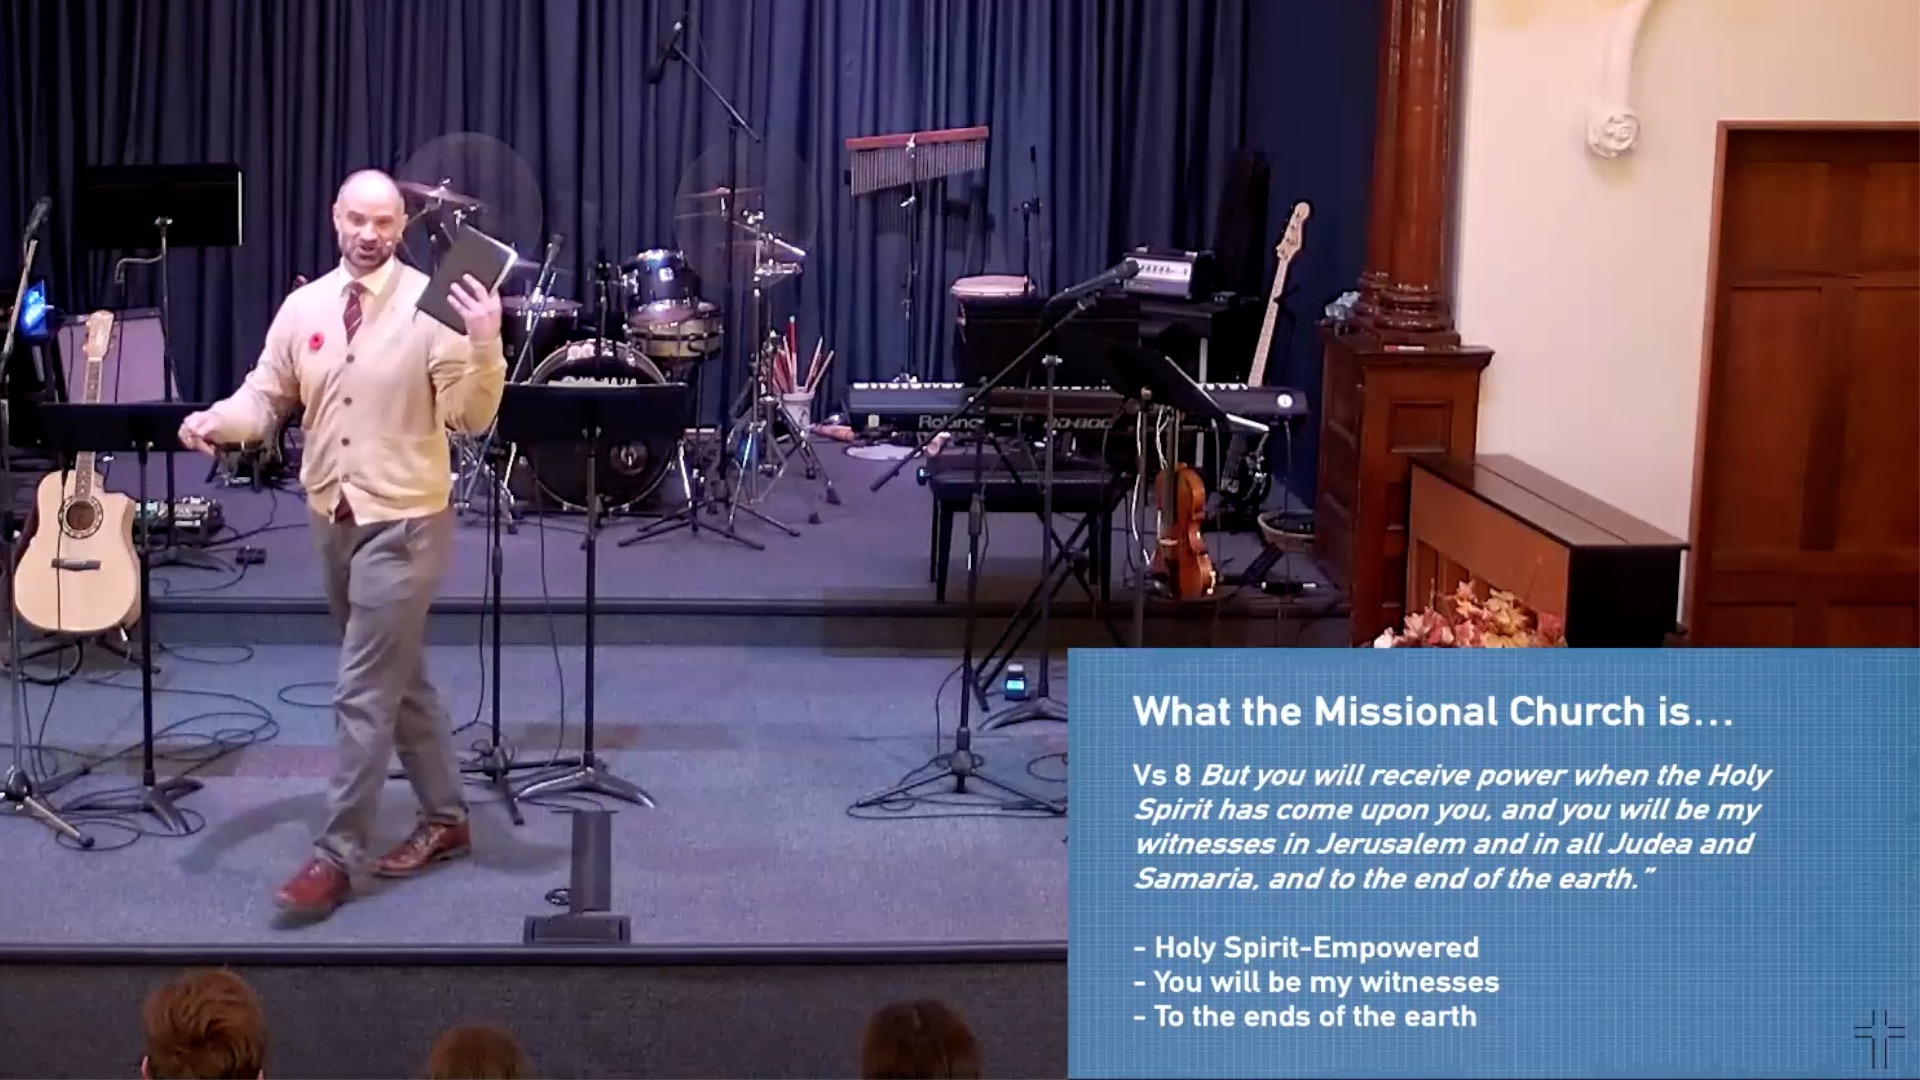 The Missional Church